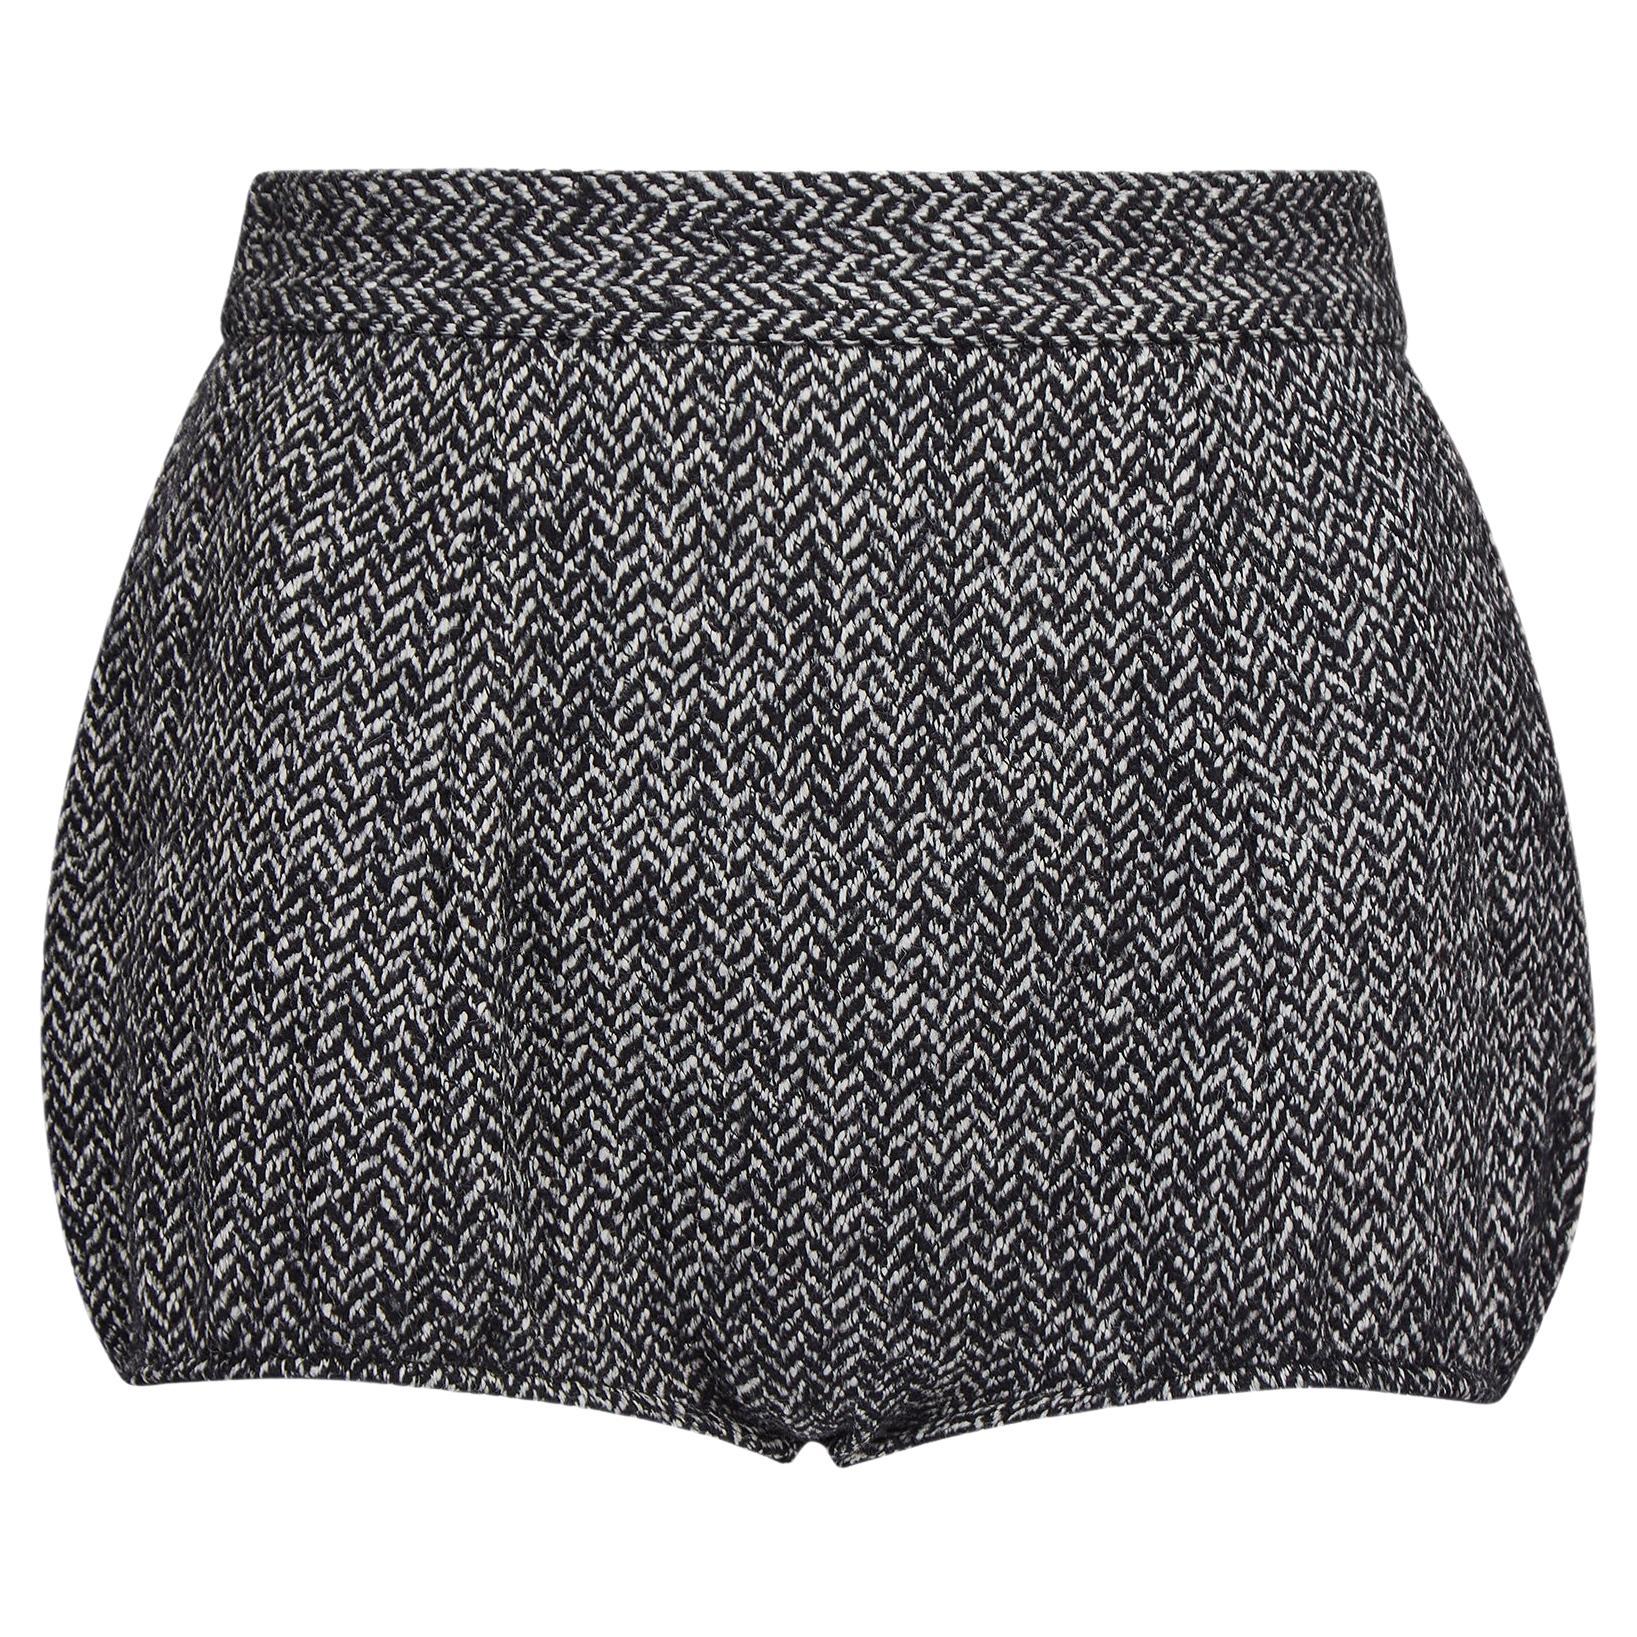 2013 Runway Dolce and Gabbana Monochrome Tweed Hotpants For Sale